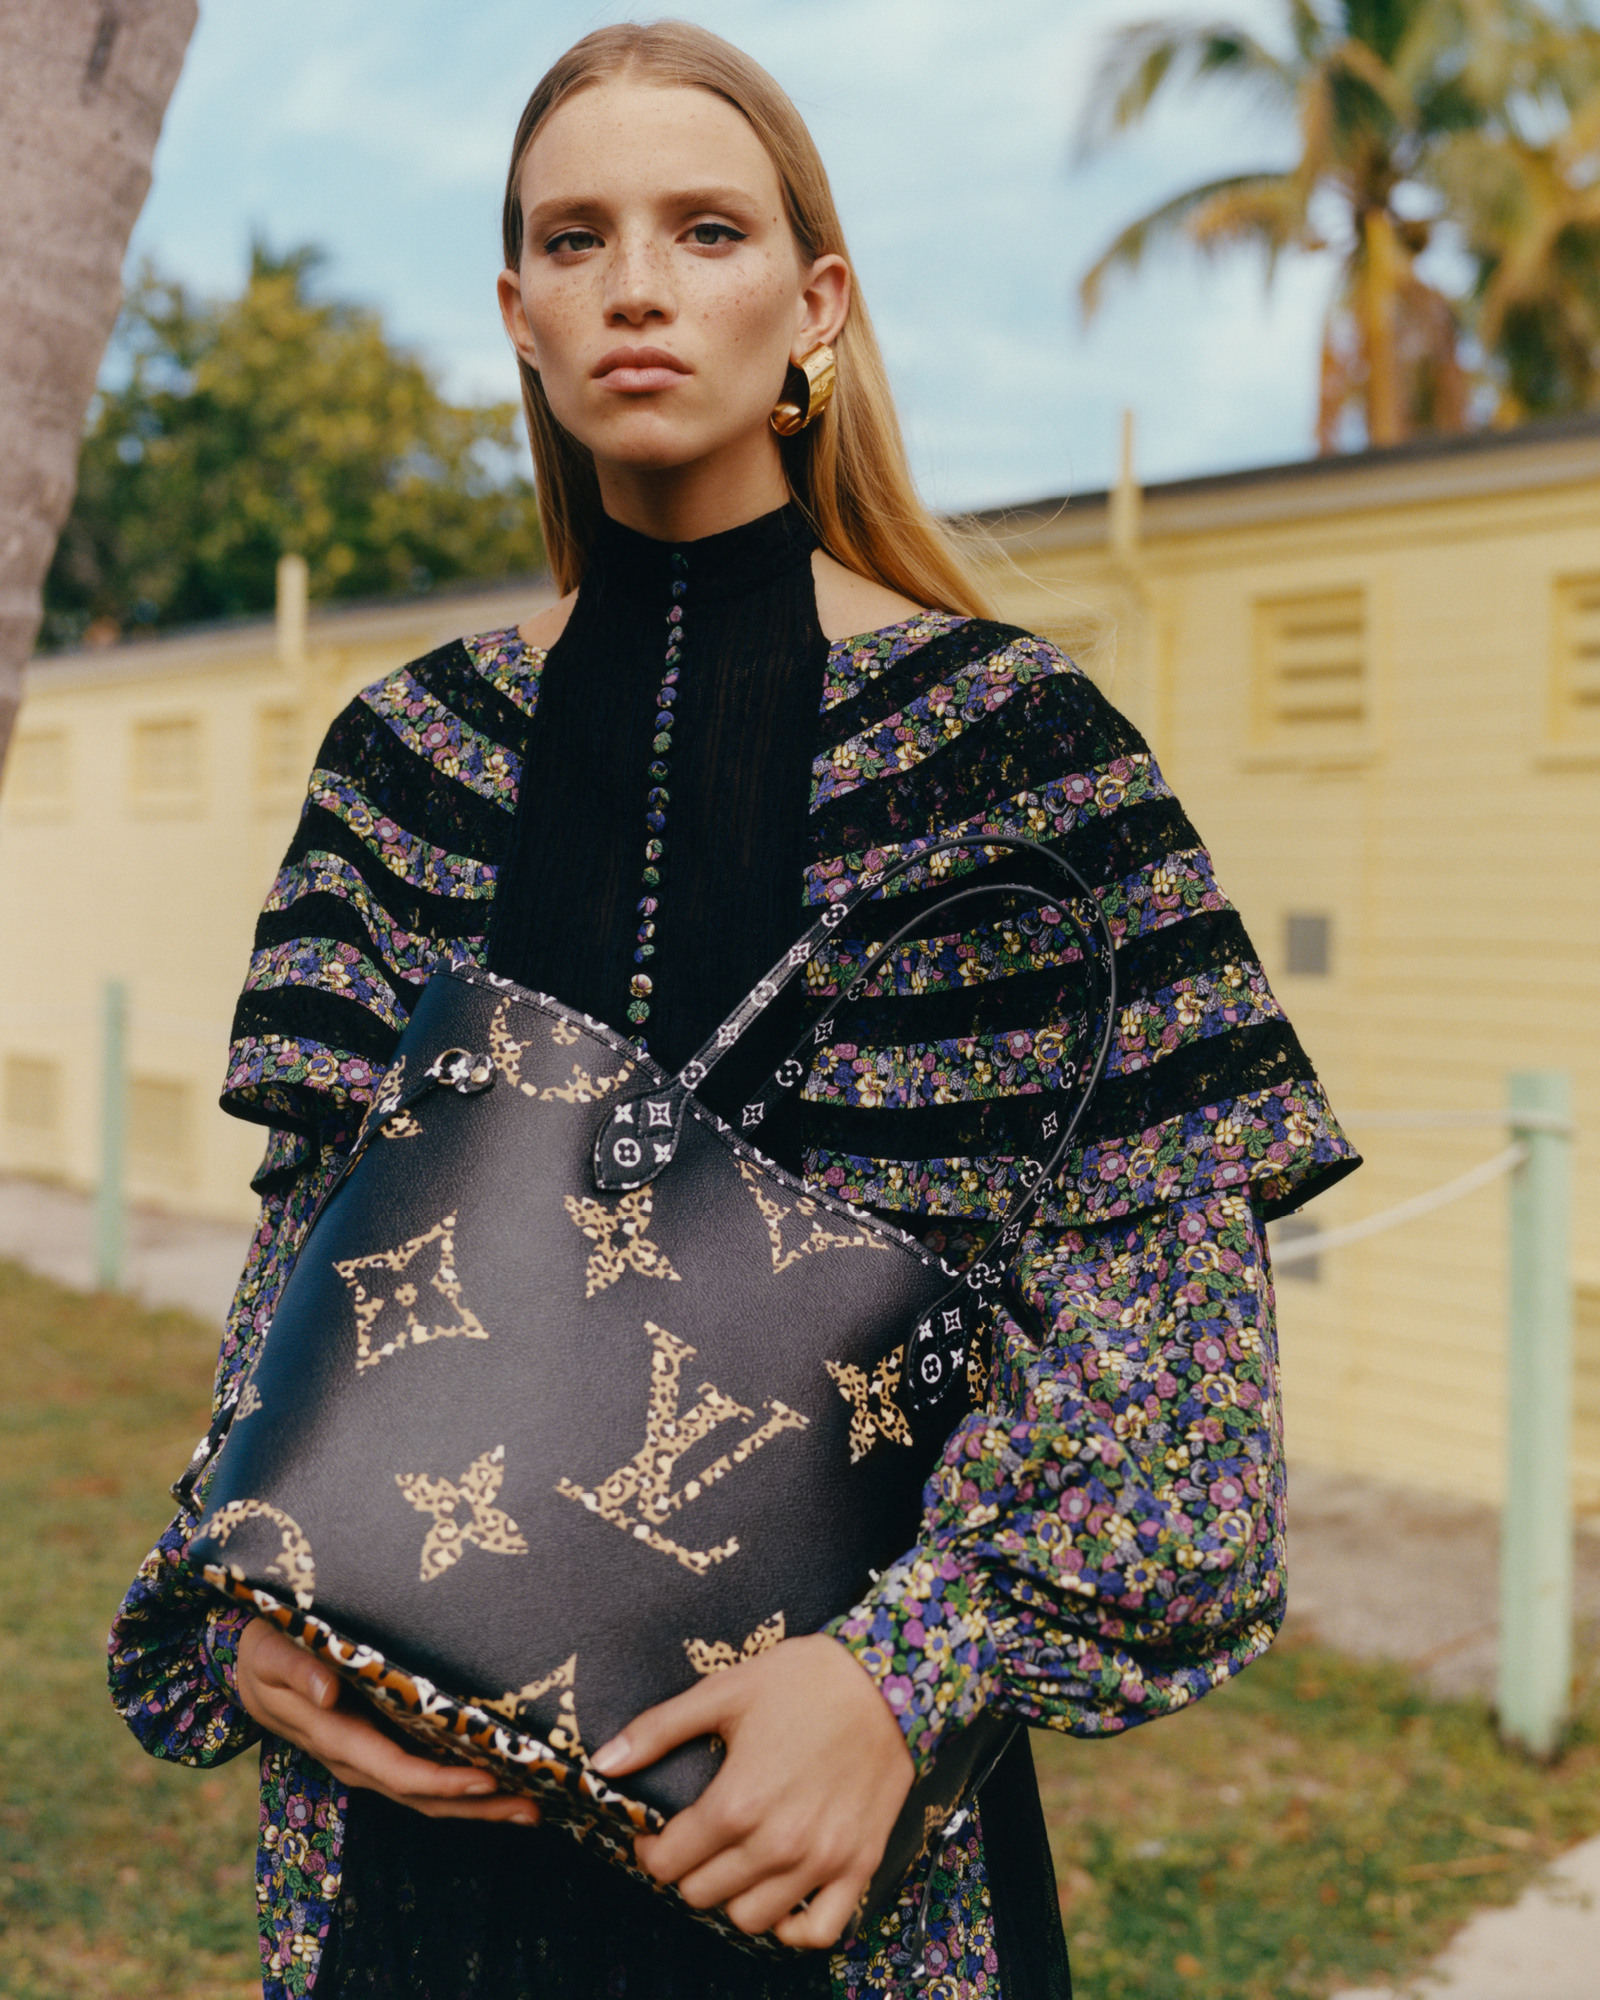 Louis Vuitton Monogram Giant Fall 2019 Ad Campaign by Stef Mitchell | The Impression